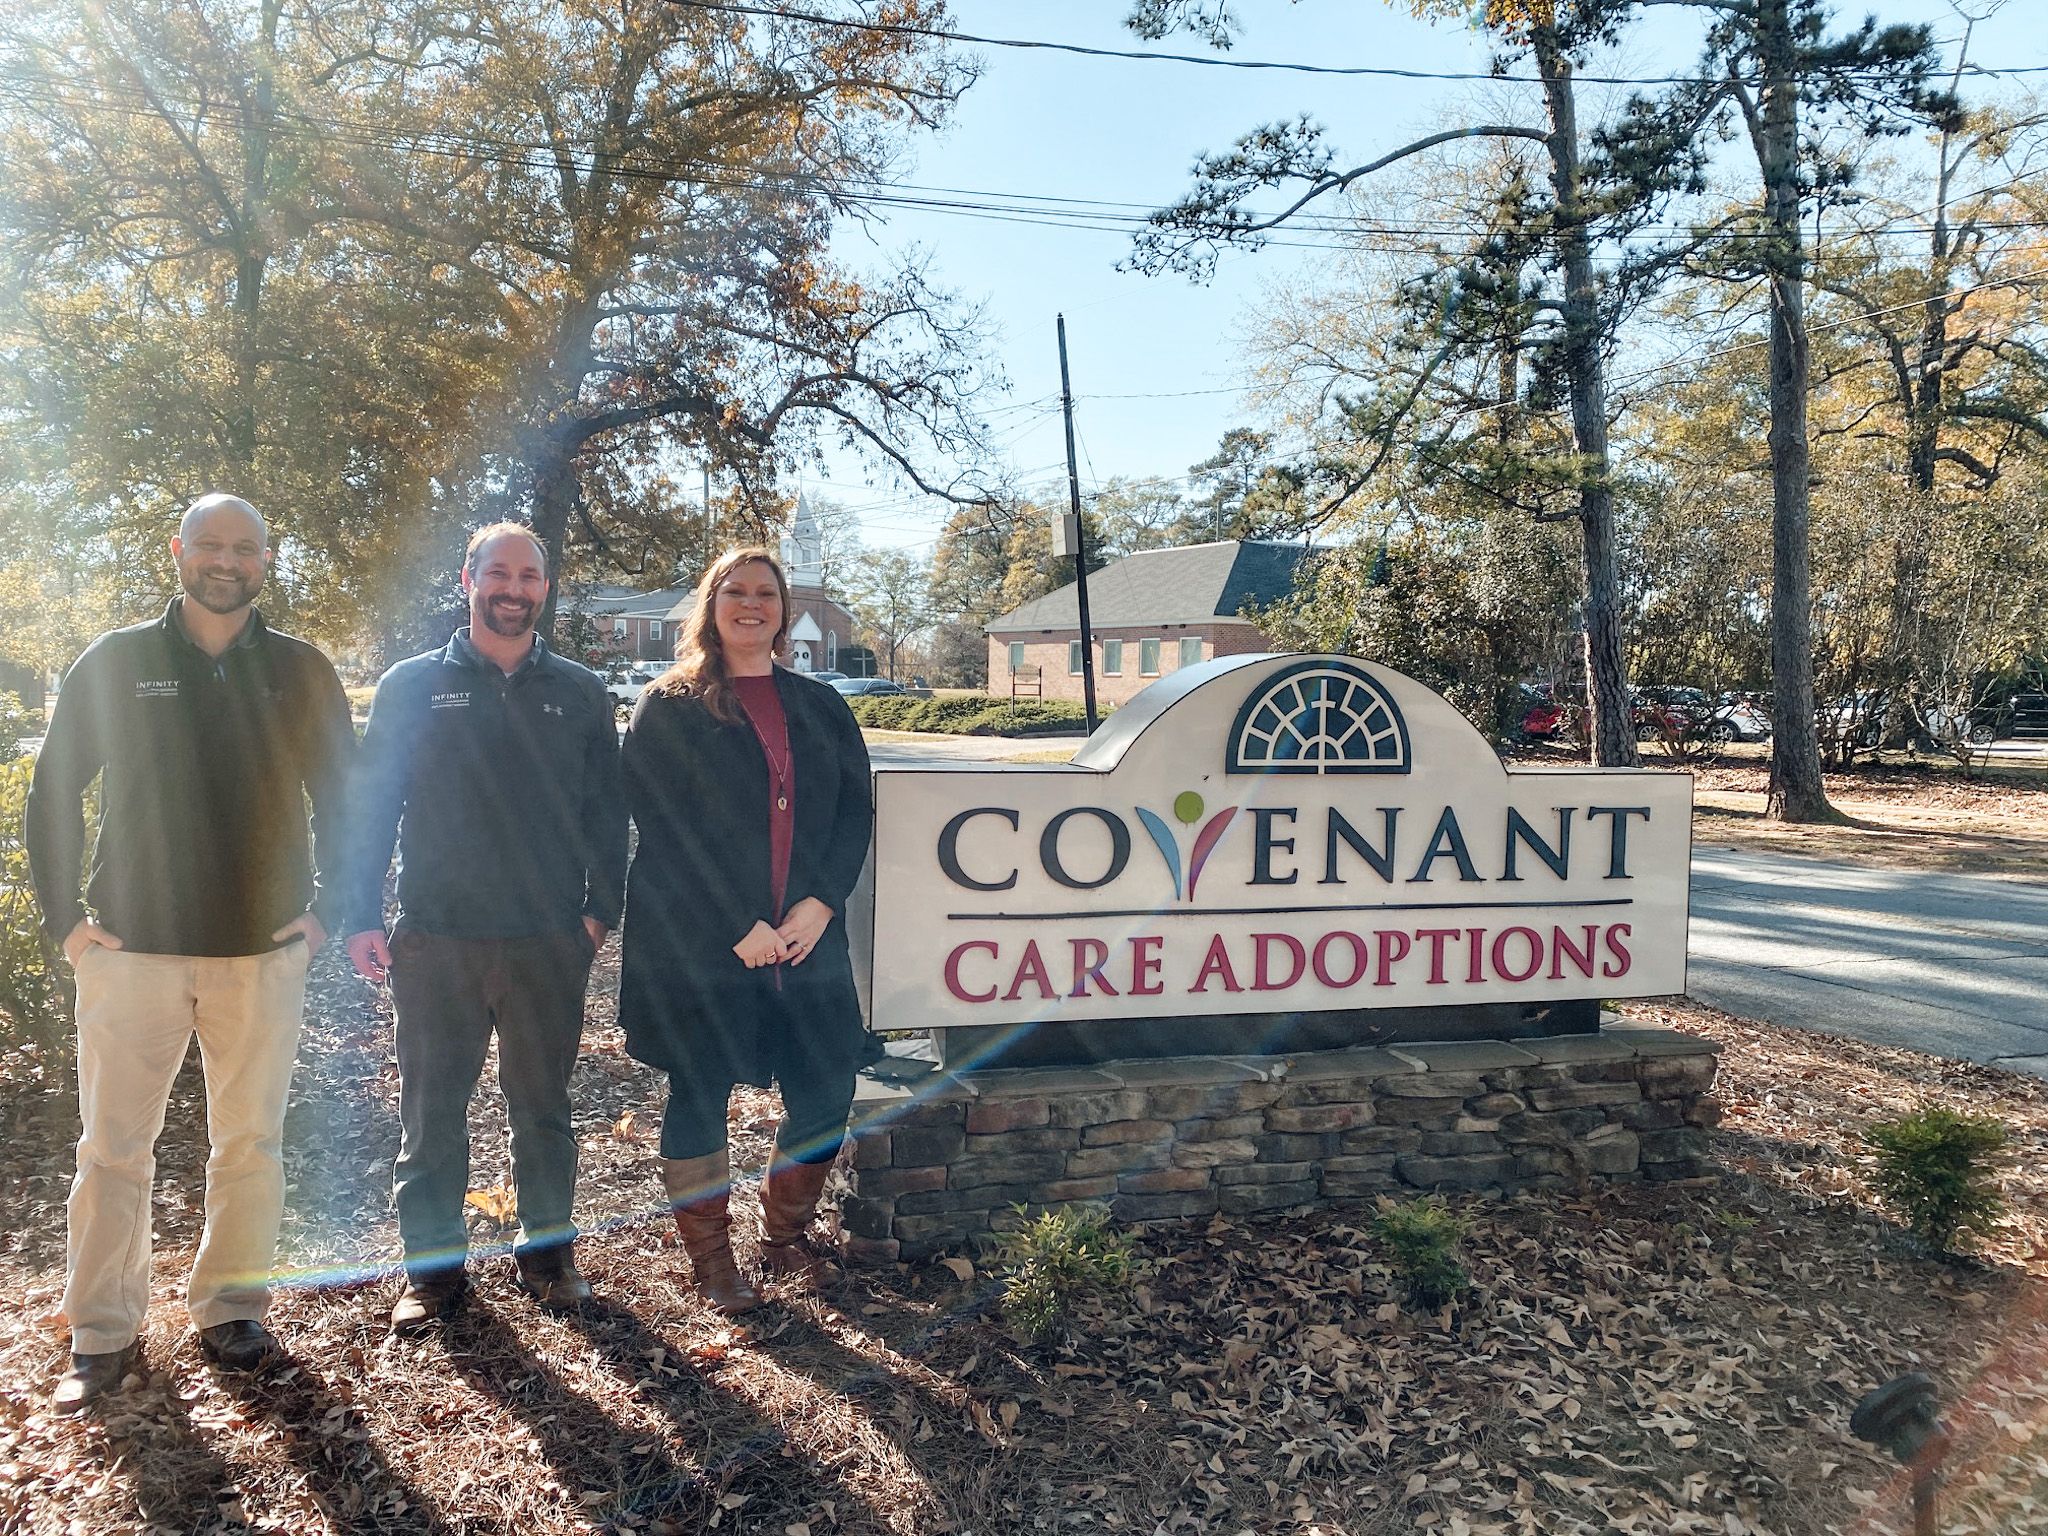 A very special day as we met with Covenant Care Adoptions